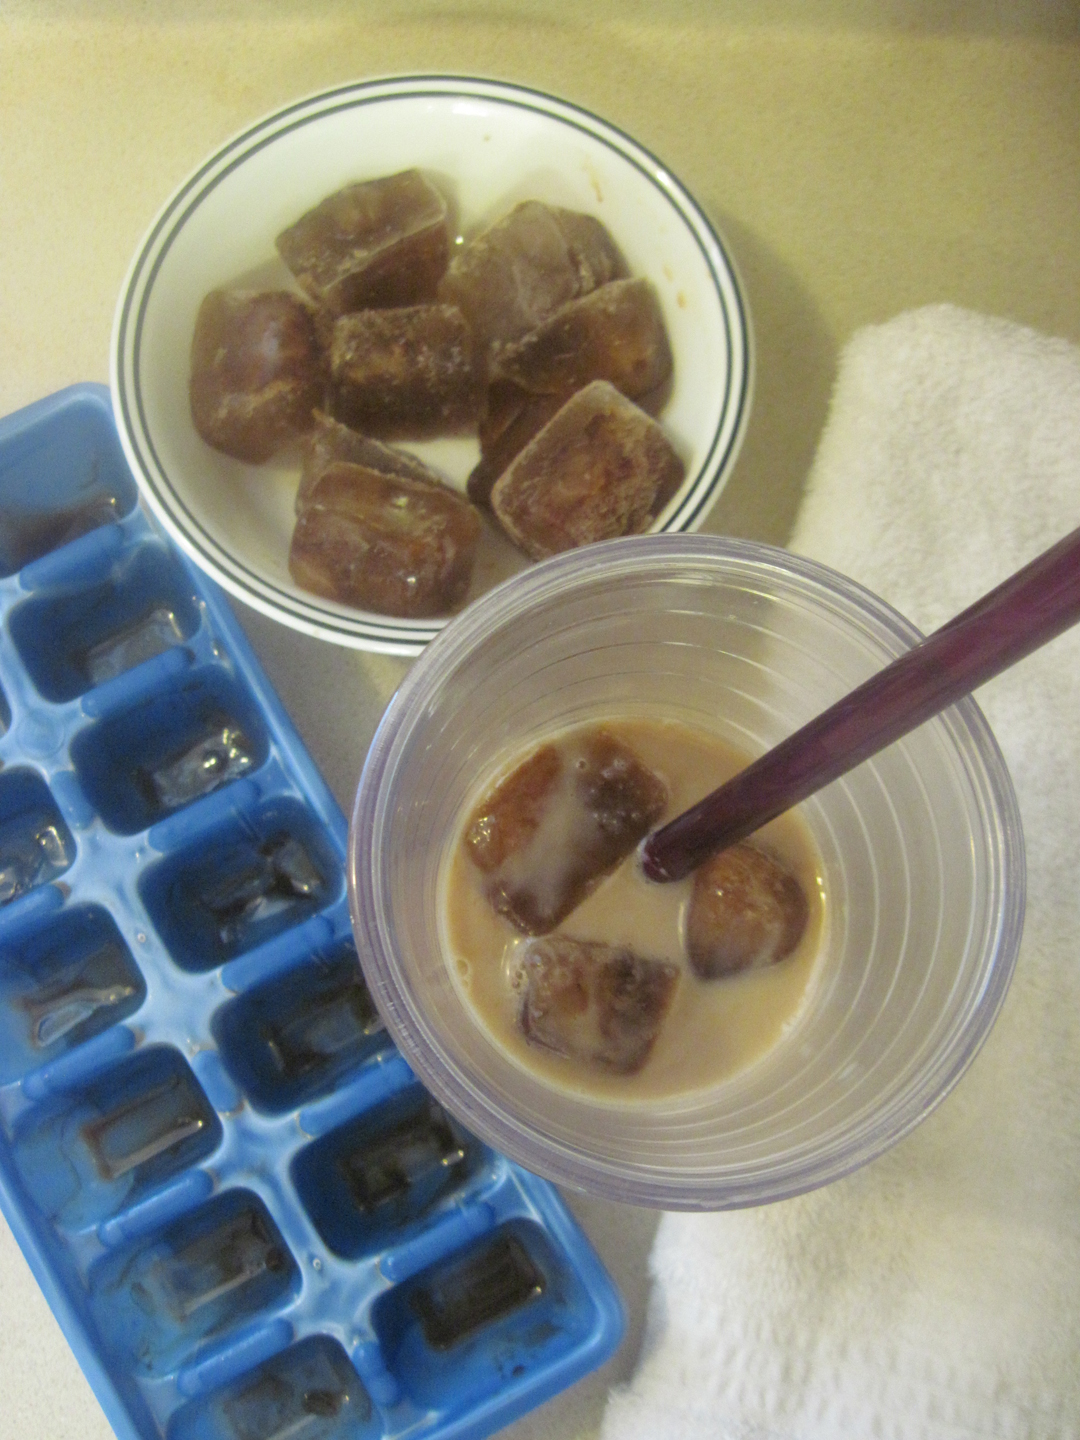 AtHomeWithNicole: Coffee Ice Cubes: Awesome & Messy